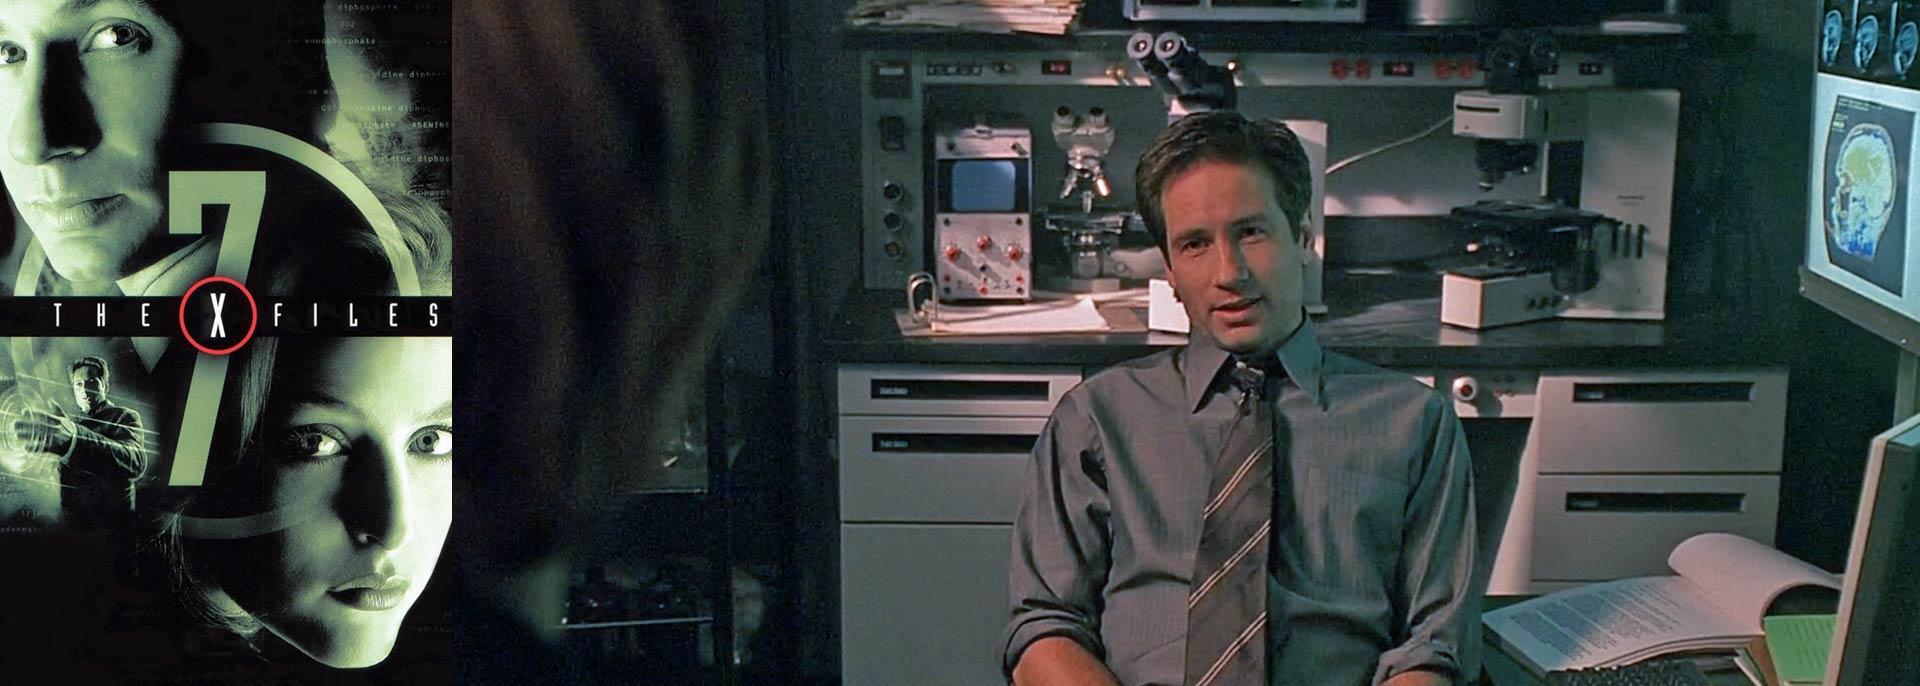 Teclab on The X Files